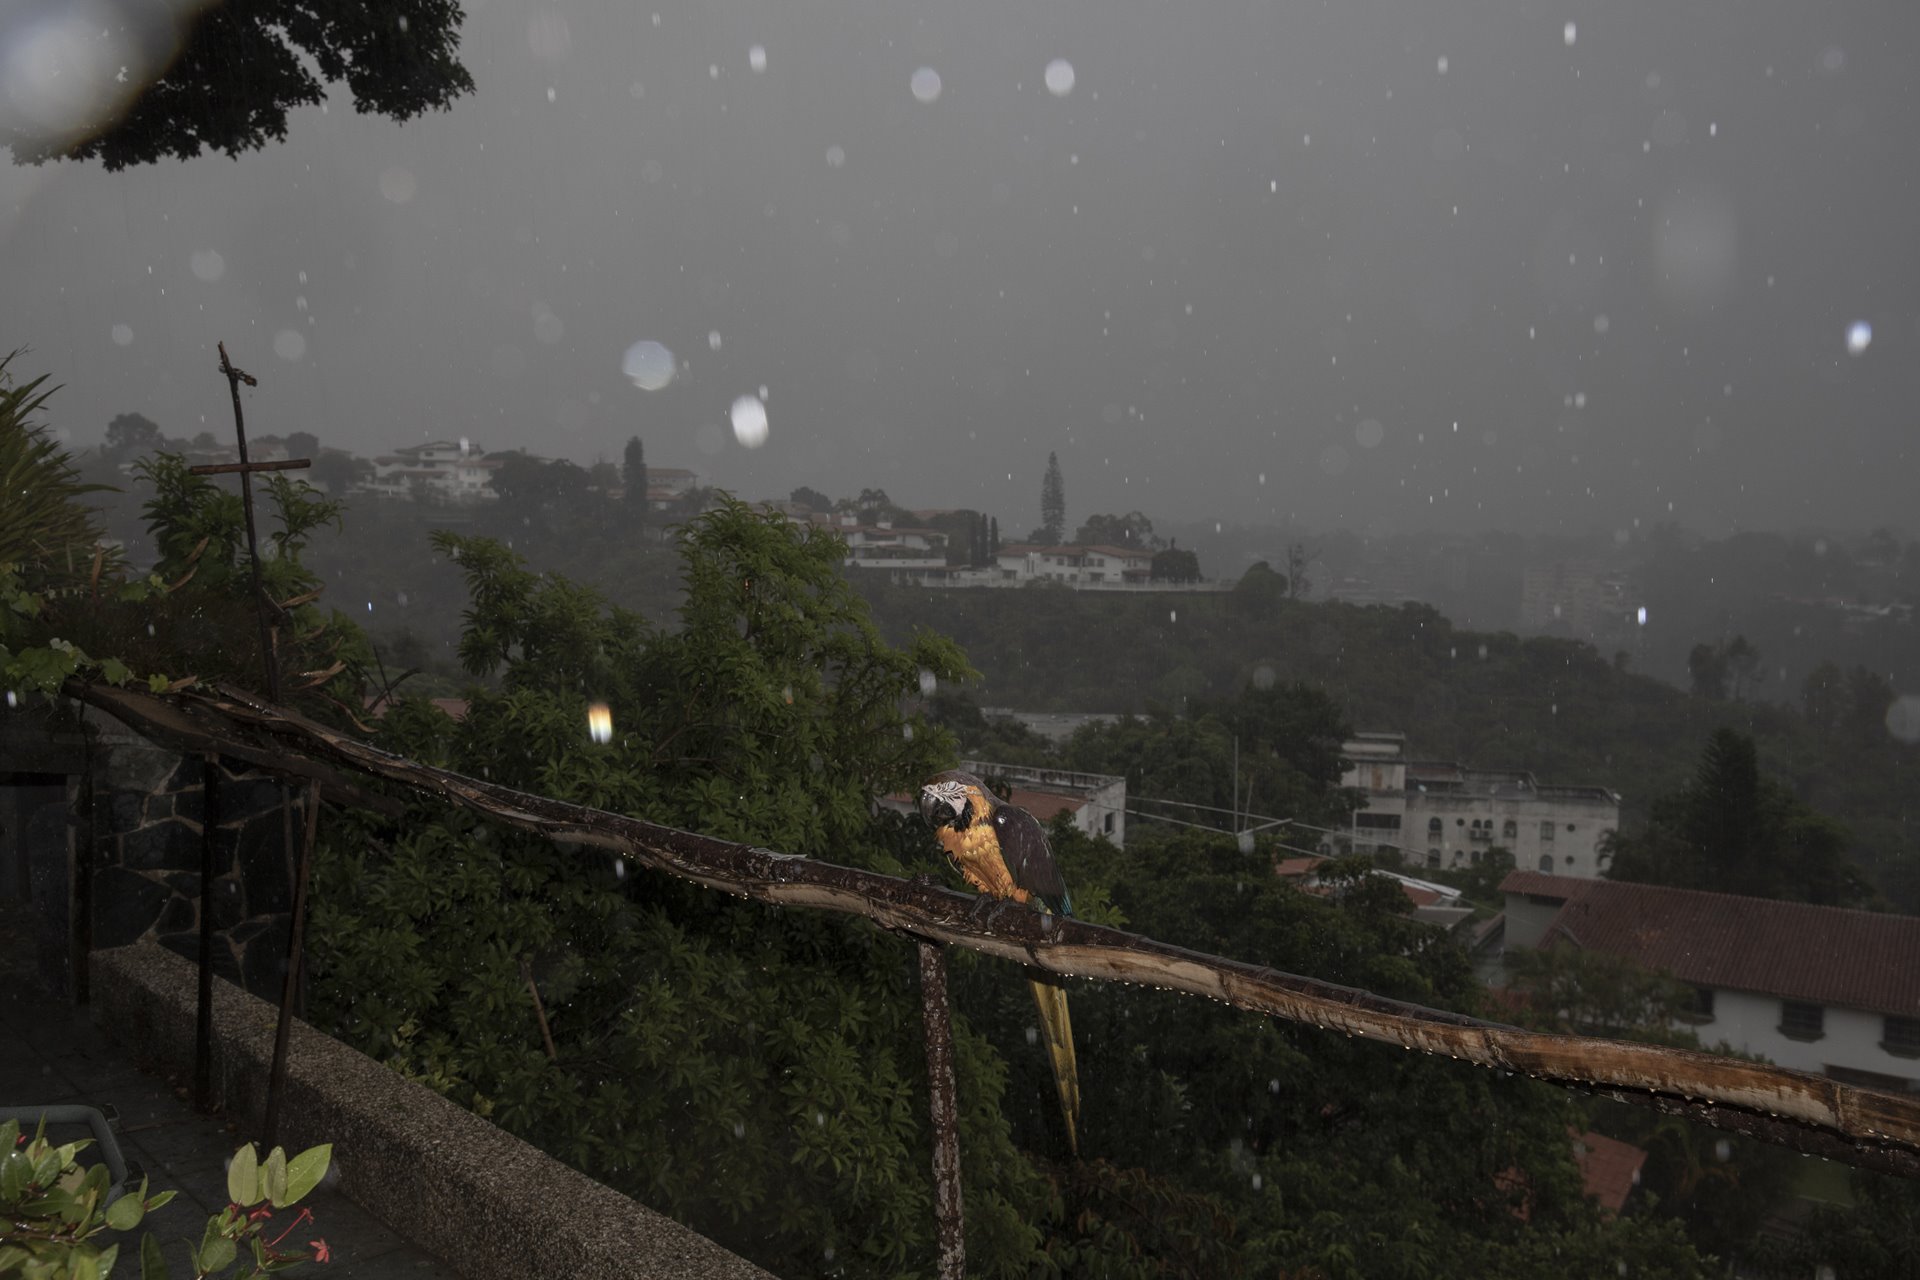 A macaw sits in heavy rain in a middle-class neighborhood in eastern Caracas, Venezuela. Although poverty decreased in 2021/22, inequality remains wide, making Venezuela one of the most unequal countries in the Americas, according to the National Poll of Living Conditions (ENCOVI).